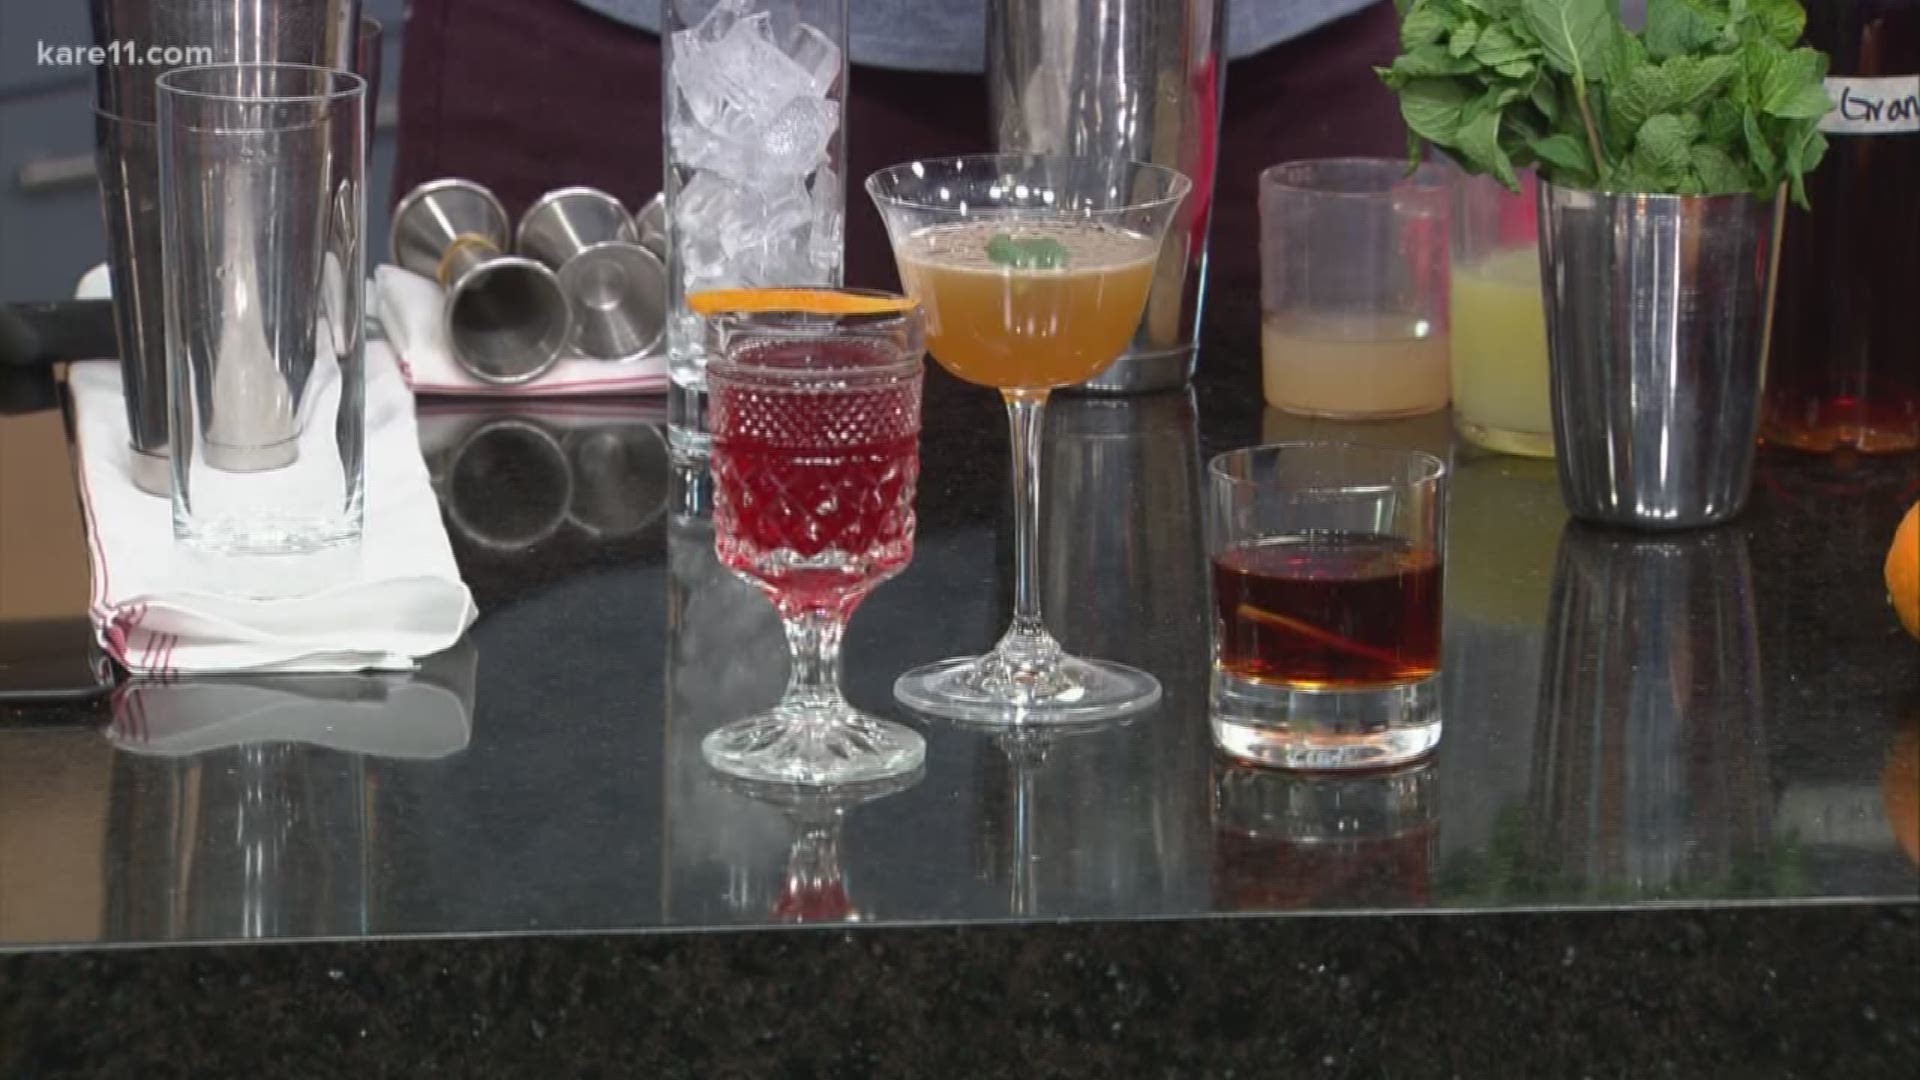 Professional mixologists, like Ian Lowther from Red Cow and Red Rabbit, are taking cocktail-making to new levels with exciting and unexpected flavor combinations.